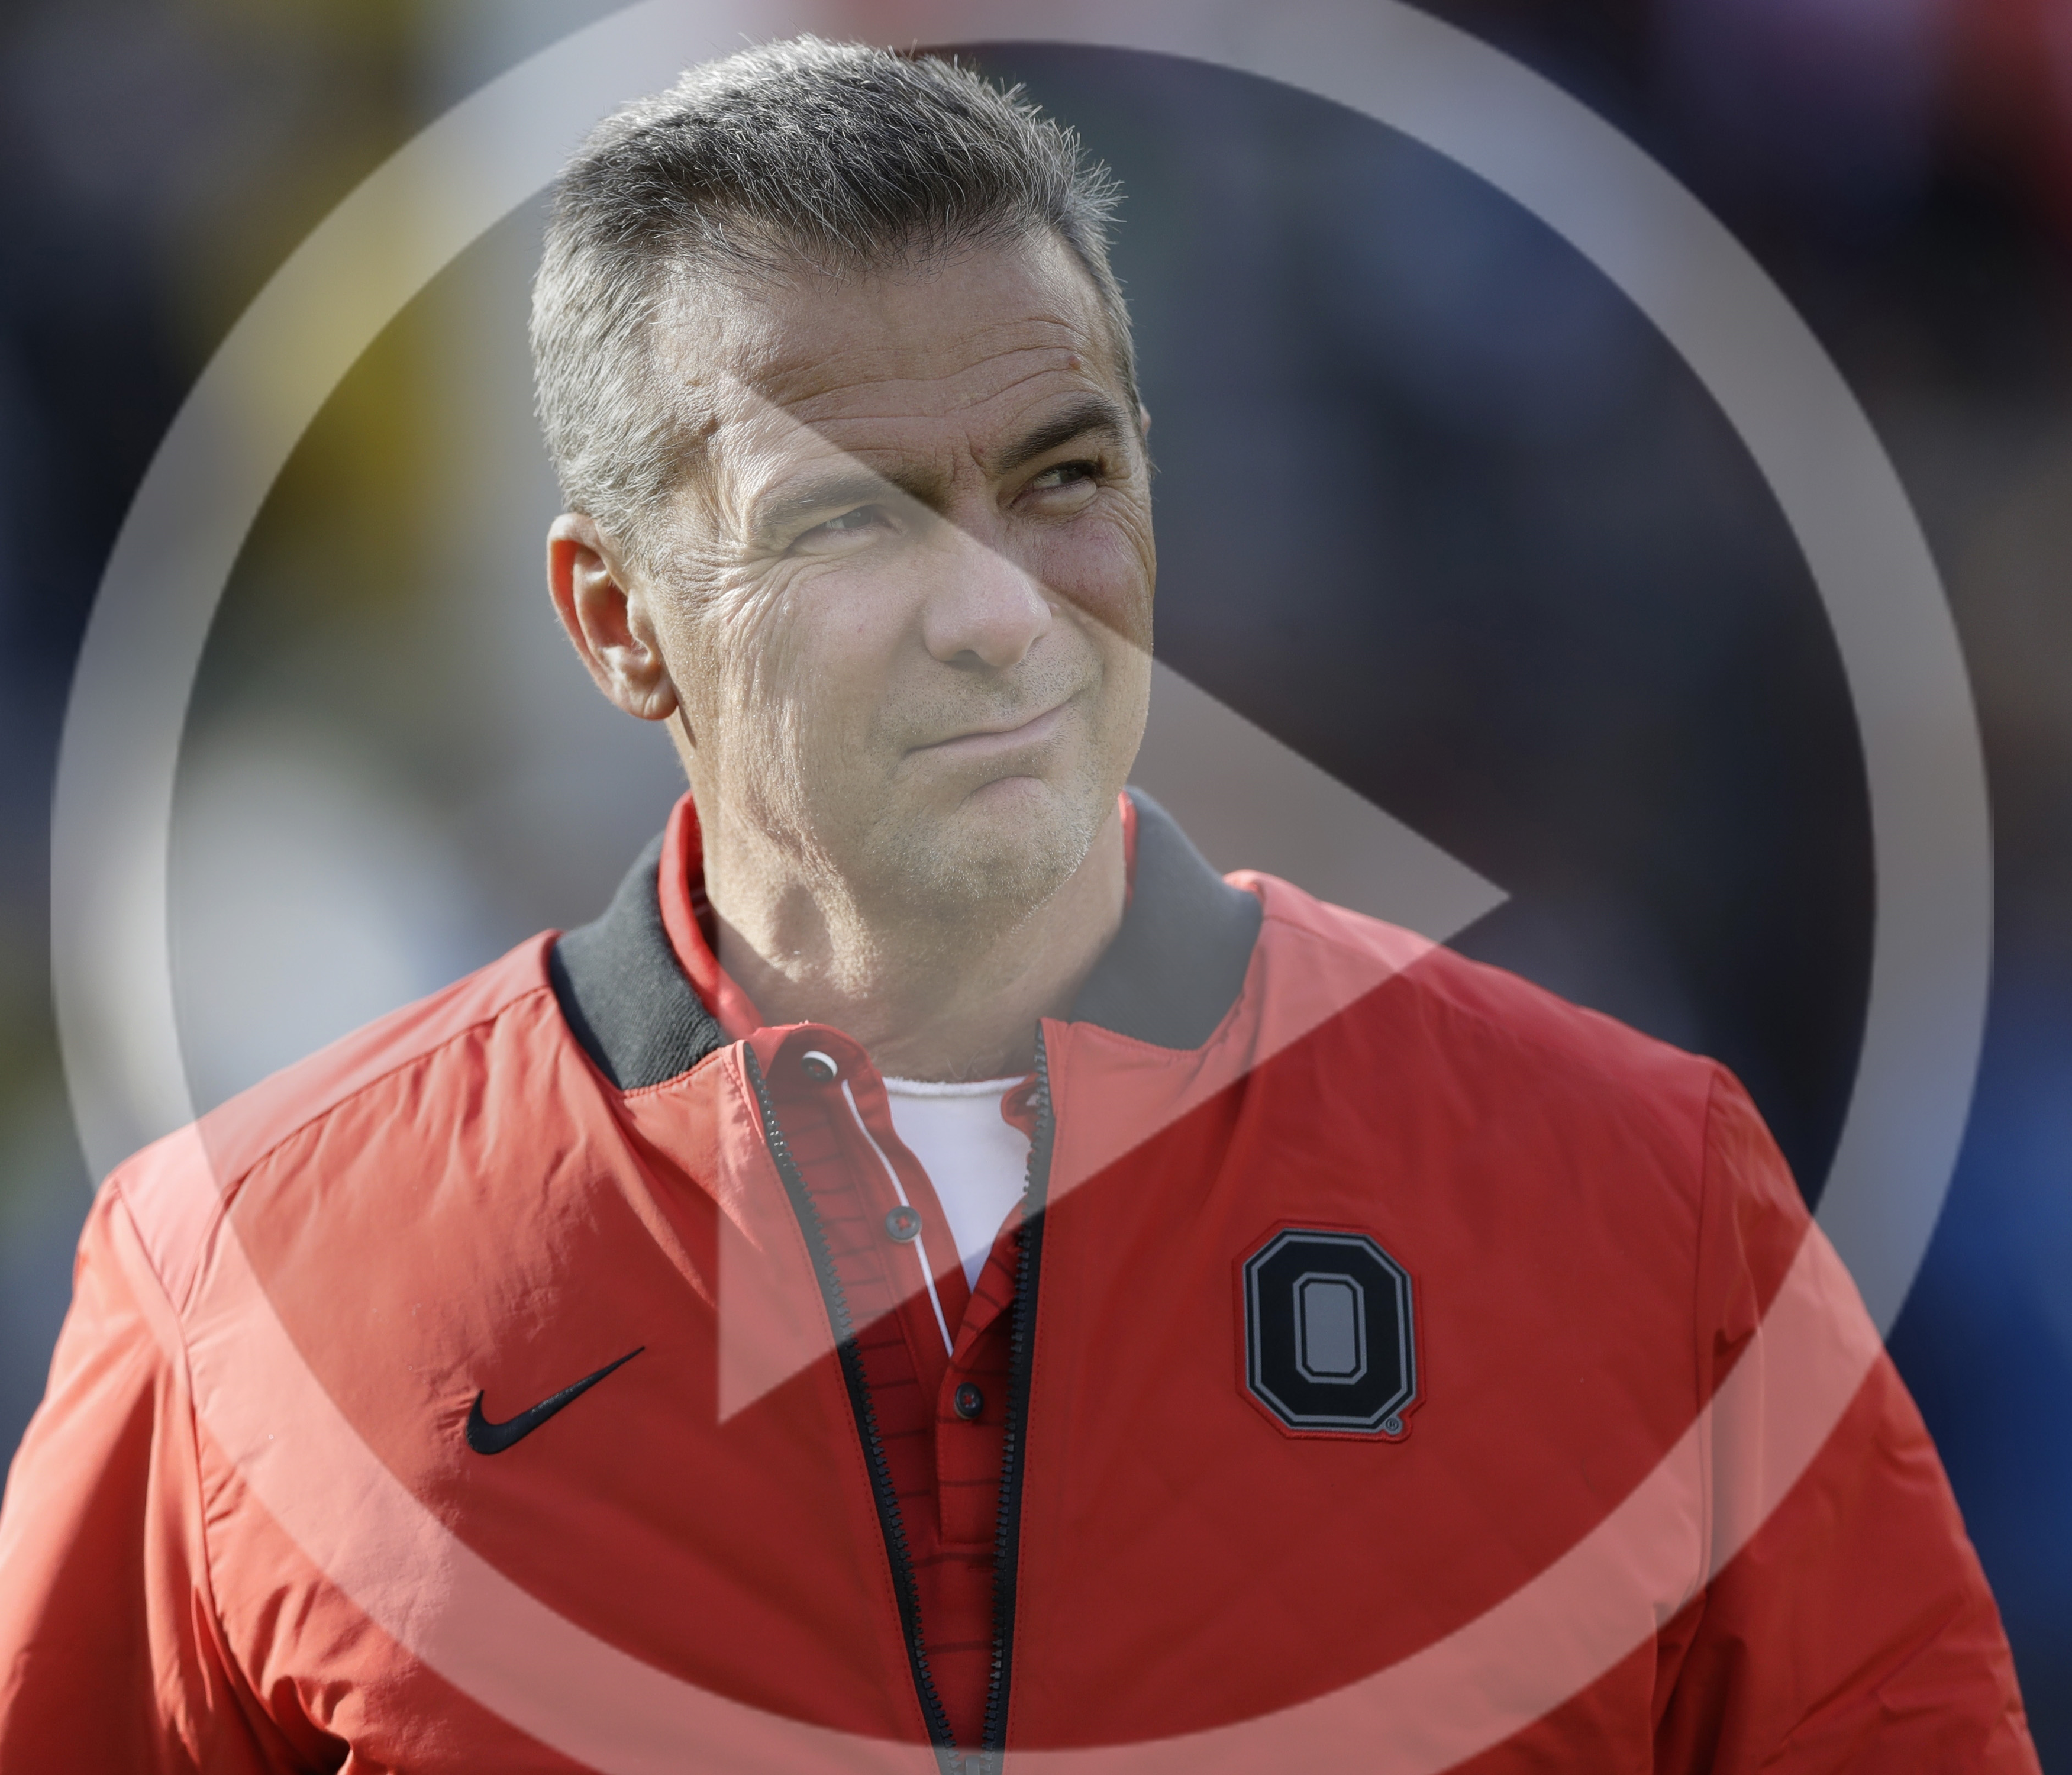 Urban Meyer RAW 11.25.17 'I'm so angry right now' - After defeating Michigan